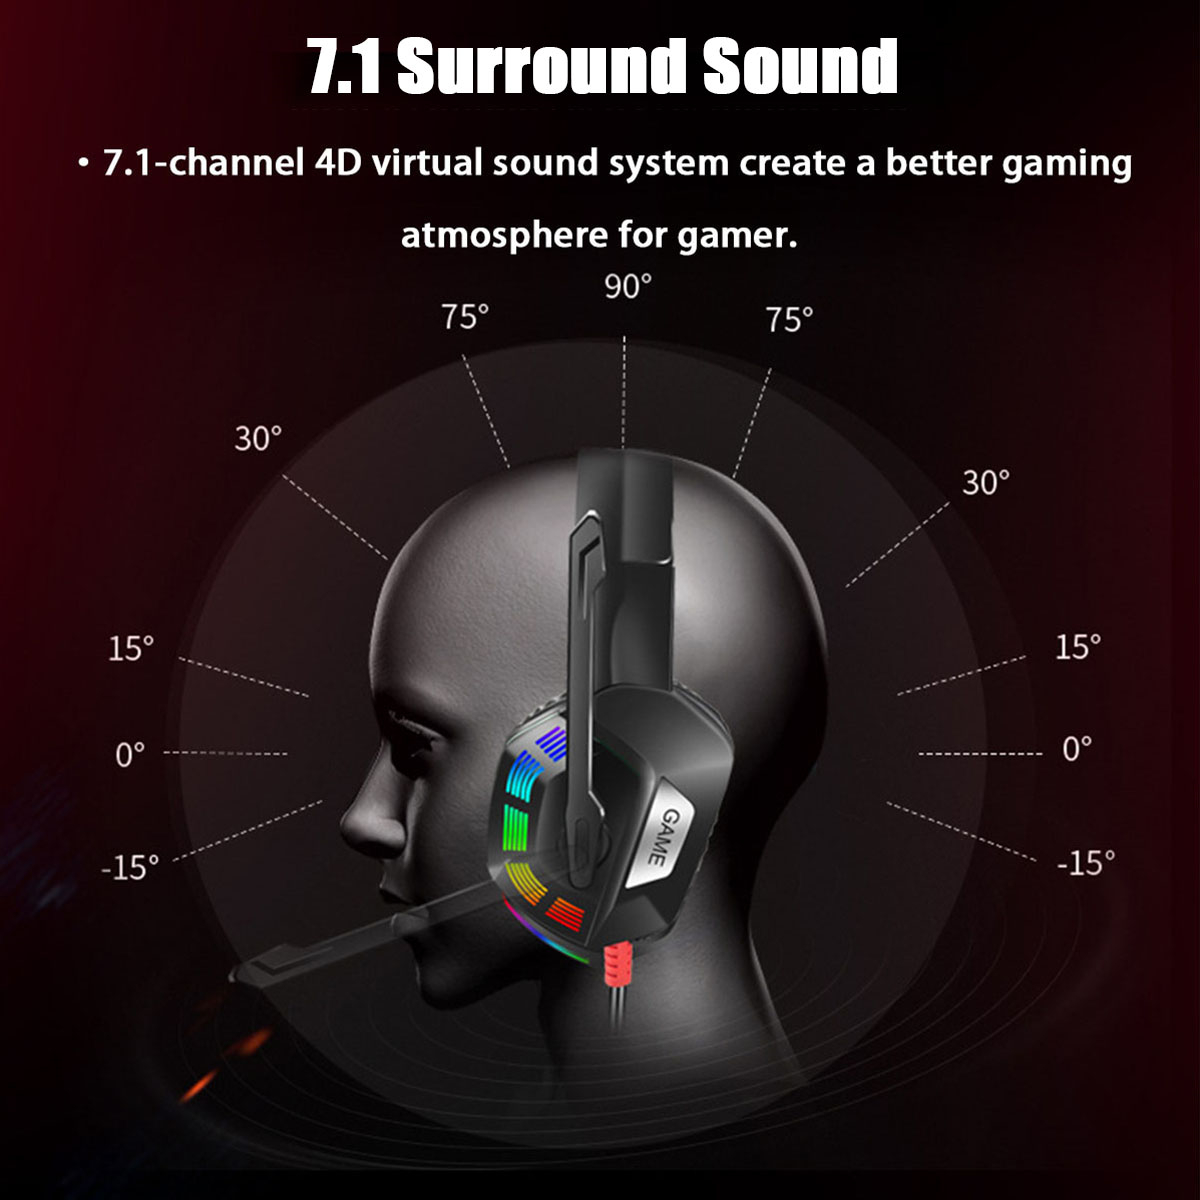 M1-Gaming-Headset-Surround-Sound-Music-Earphones-USB-71--35mm-Wired-RGB-Backlight-Game-Headphones-wi-1827492-5